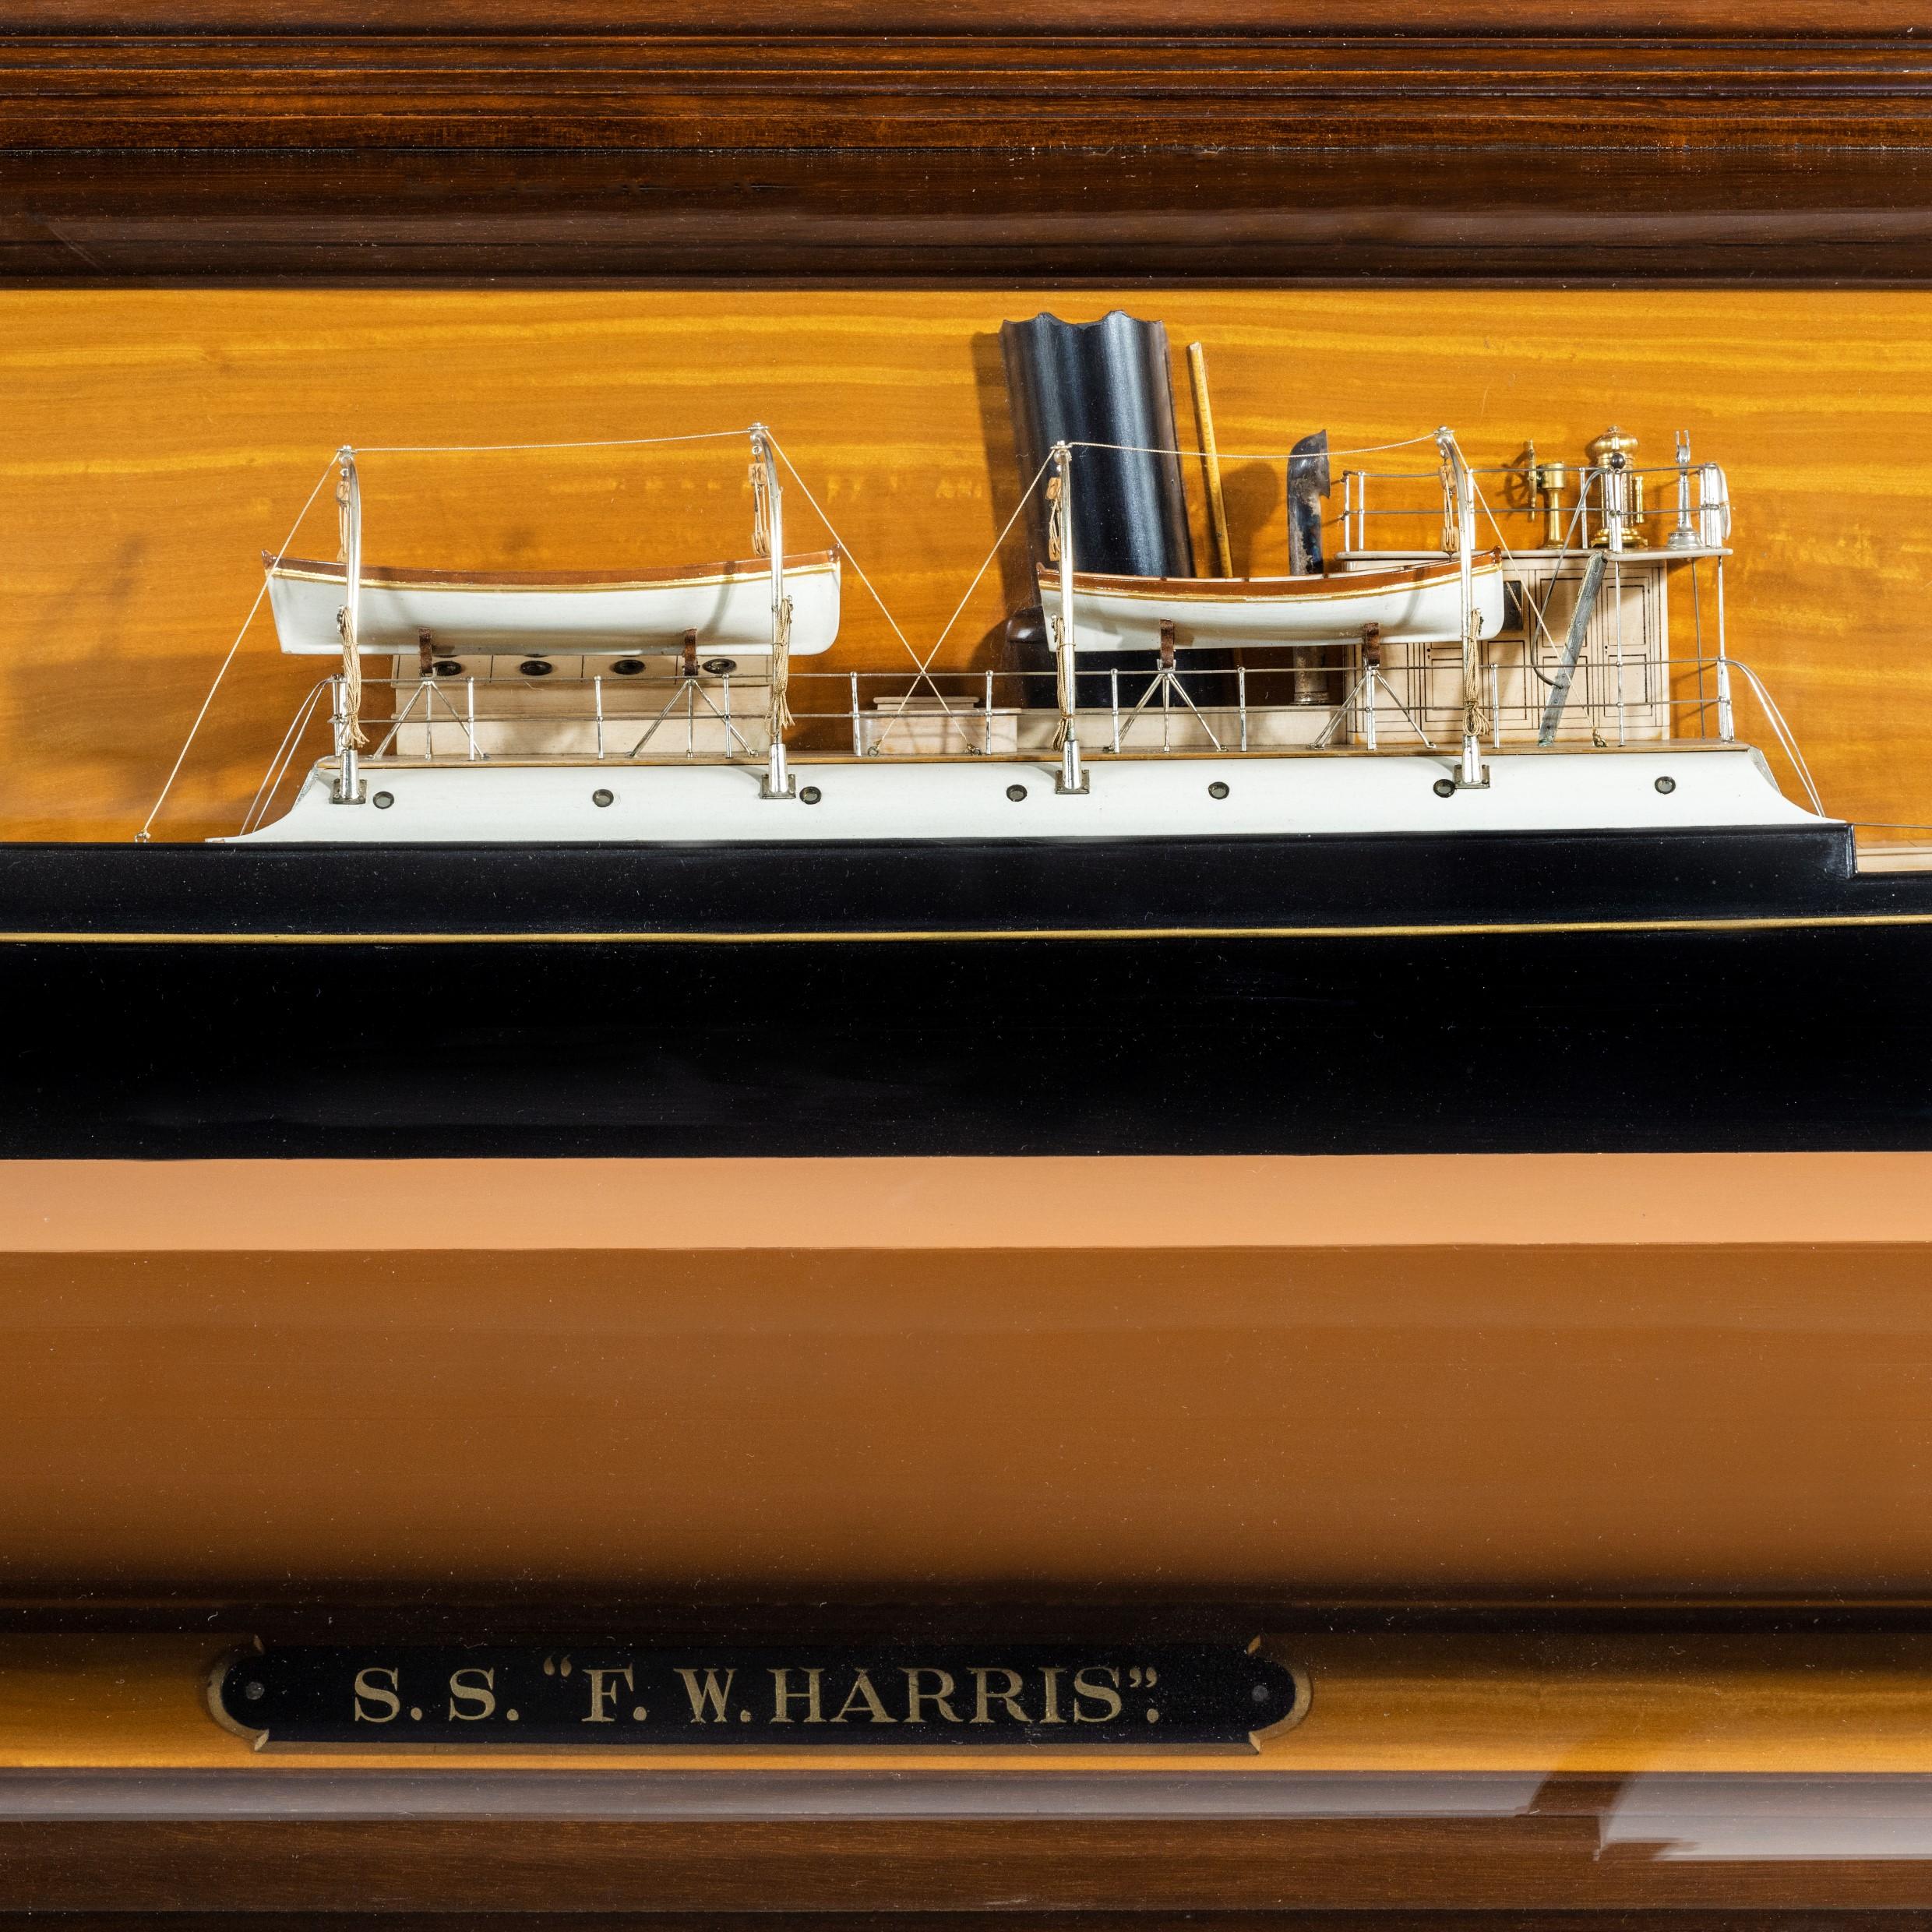 Shipyard Model of the Wooden Steam Ship ‘S.S. F.W.Harris’ For Sale 5